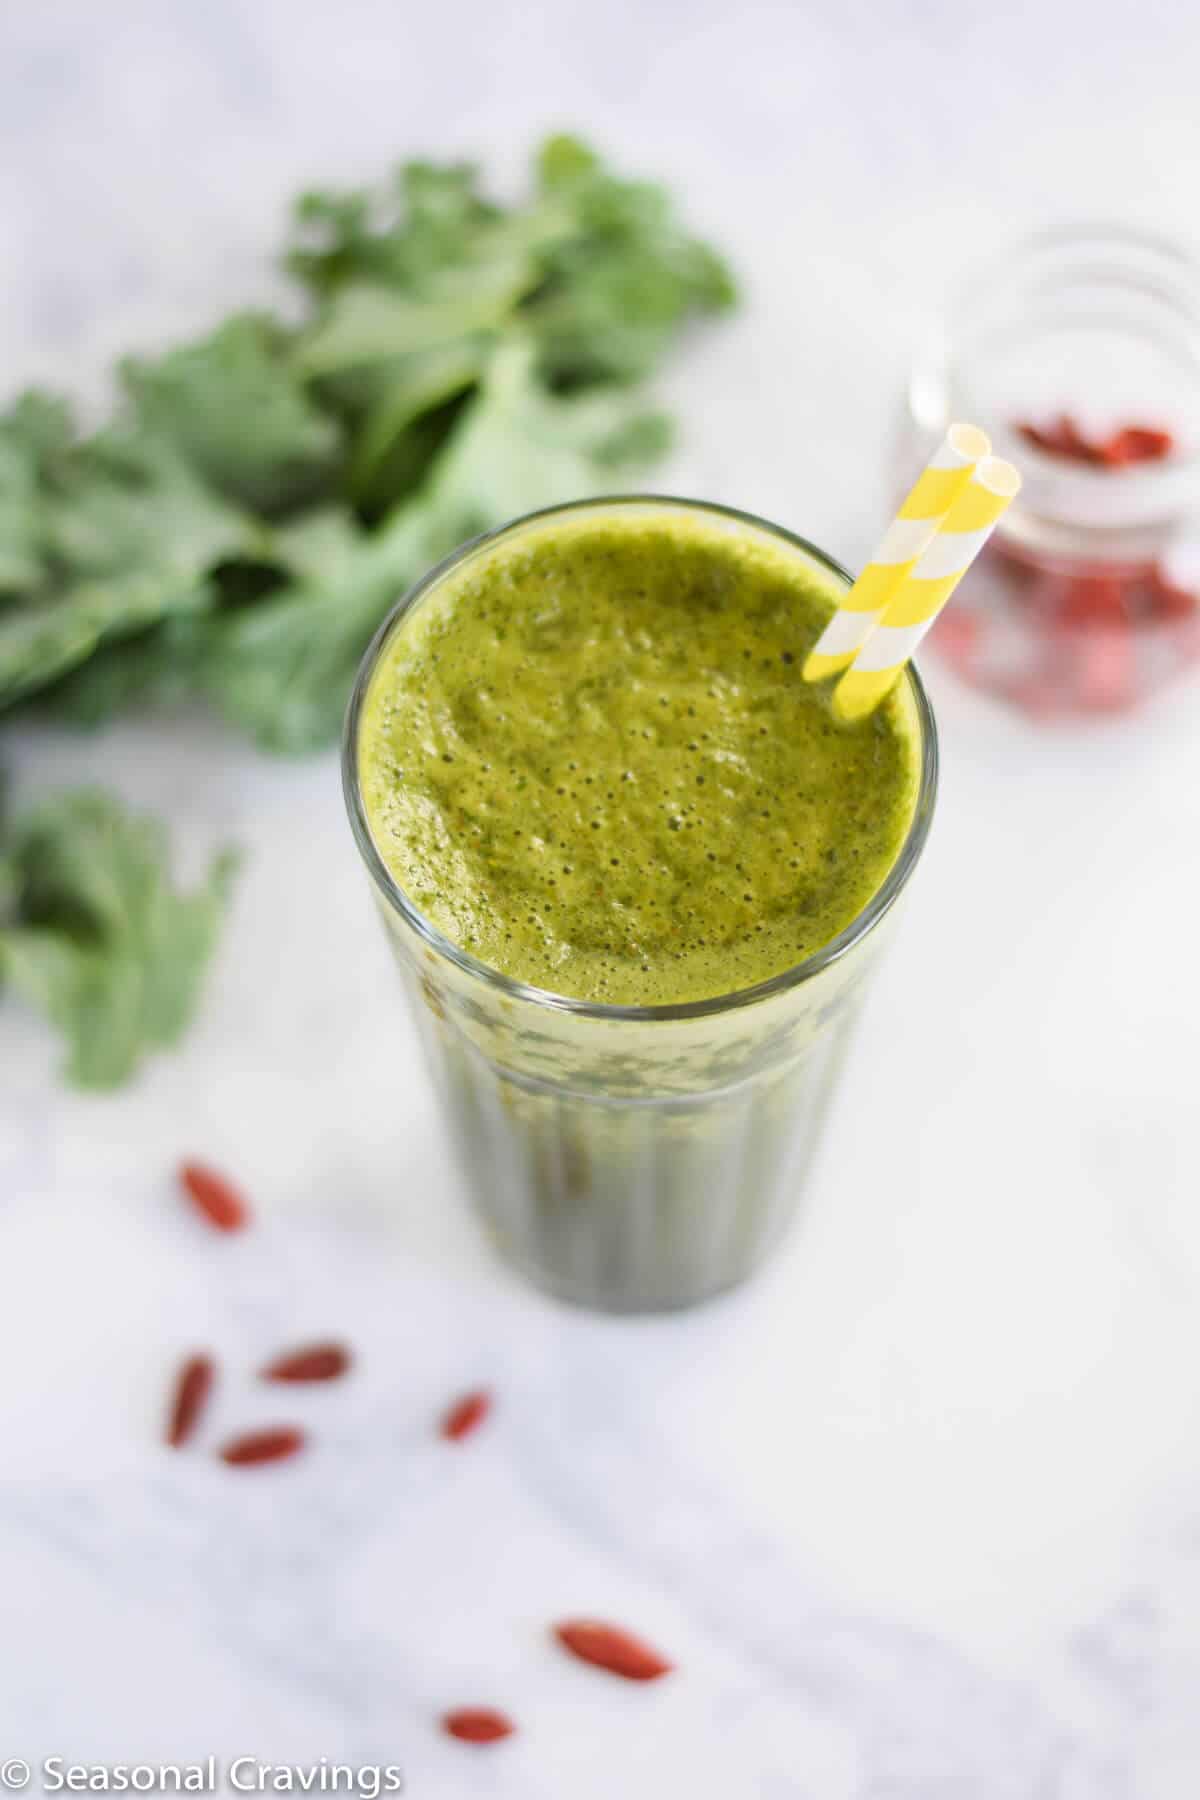 Green Goji Berry Smoothie in glass with kale on side